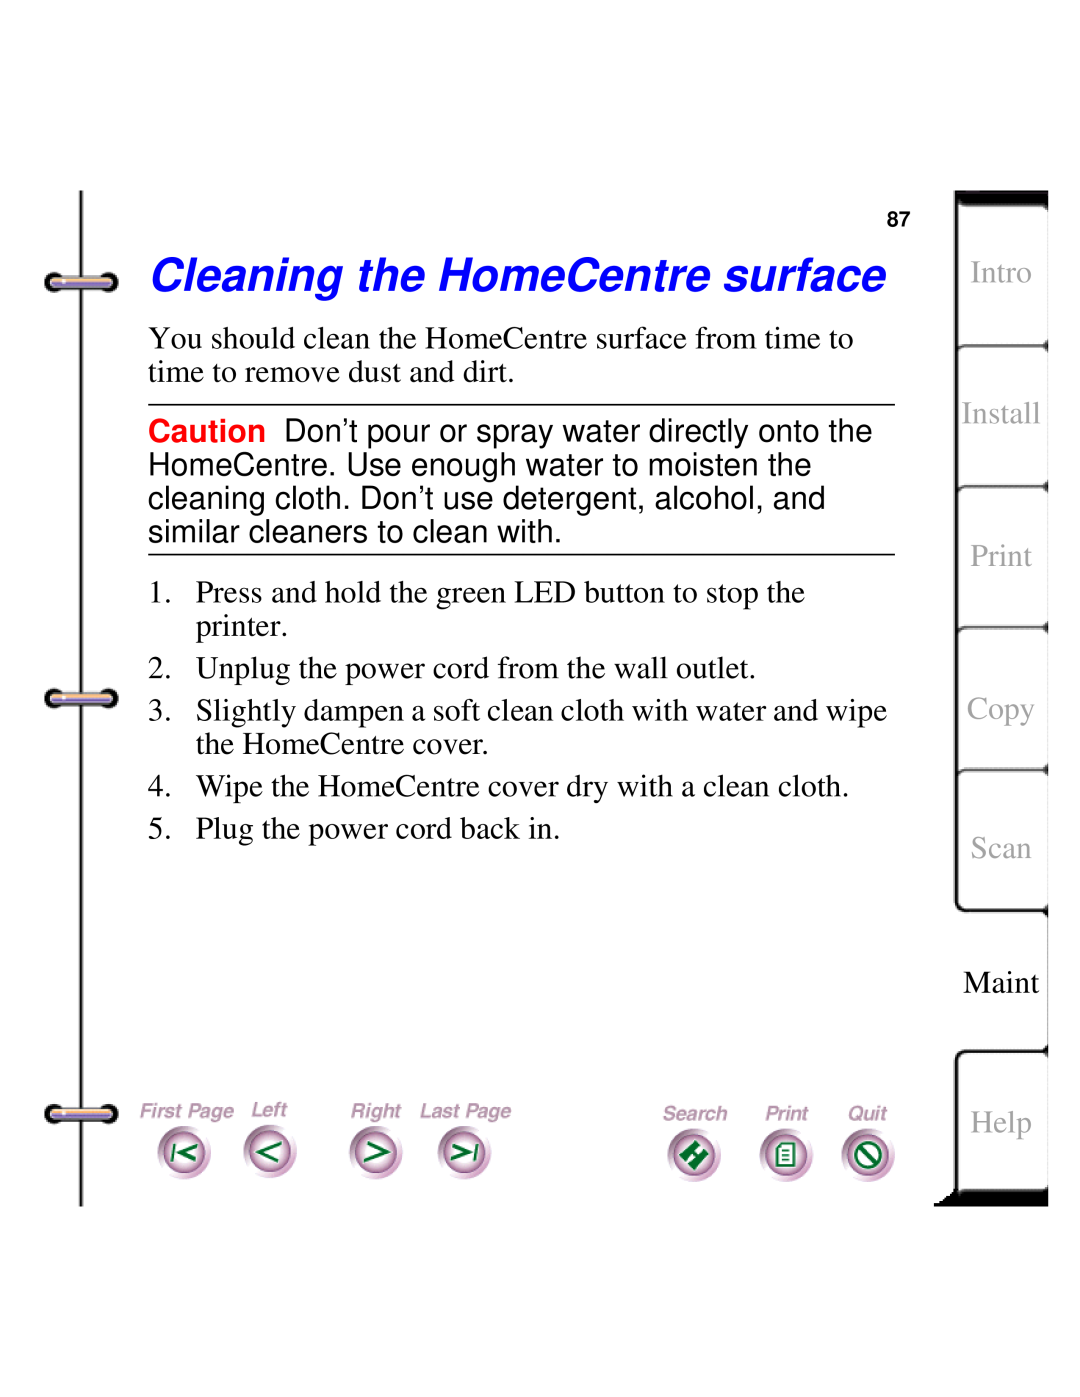 Xerox Document HomeCentre manual Cleaning the HomeCentre surface, Intro, Install, Print, Scan, Help 